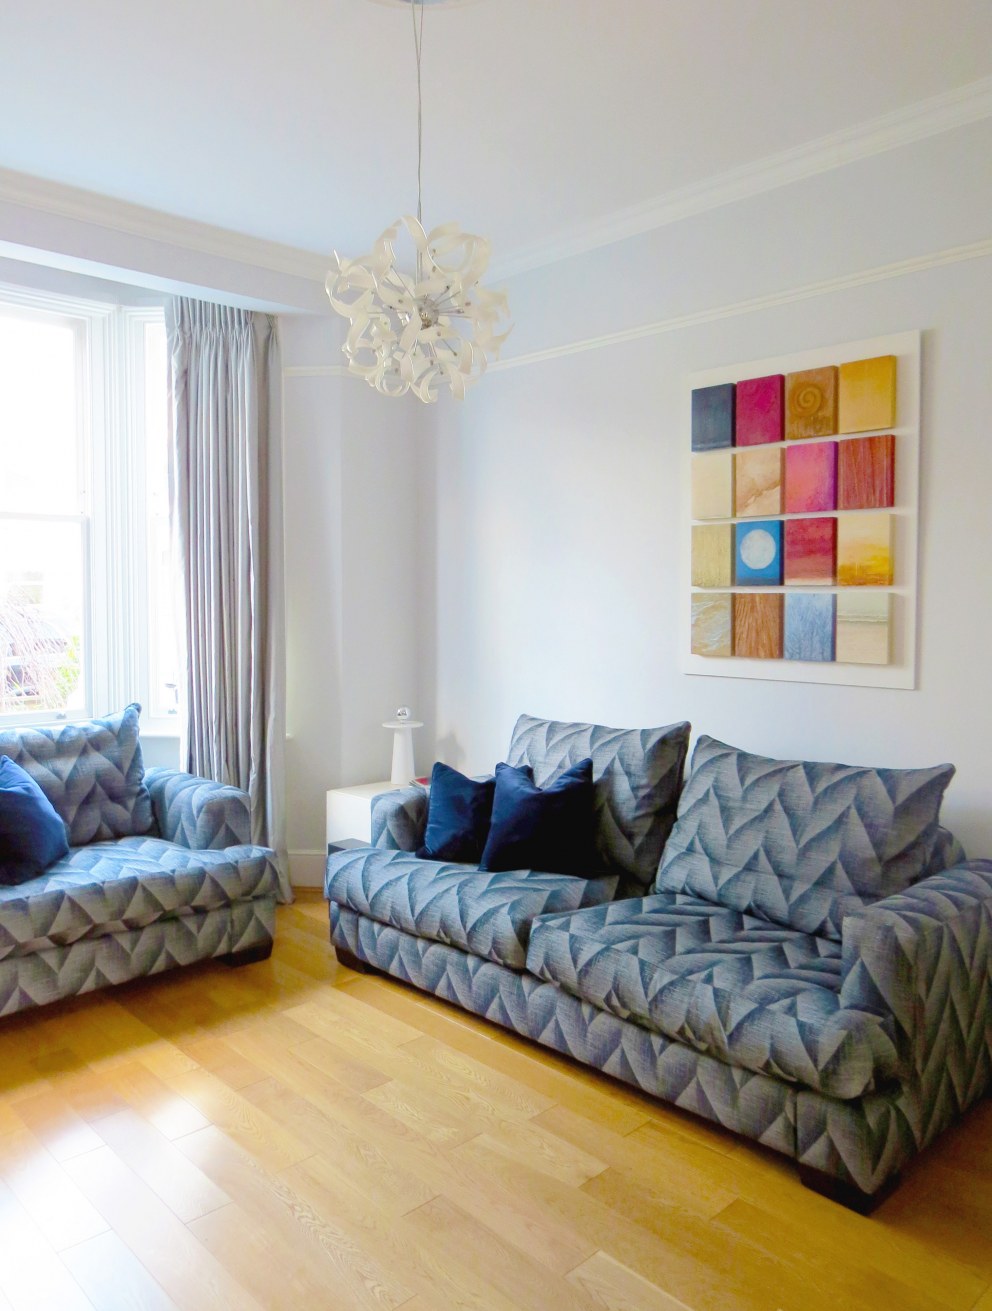 W12 home make-over | Re-upholstering the family sofa gave it a whole new lease of life. | Interior Designers